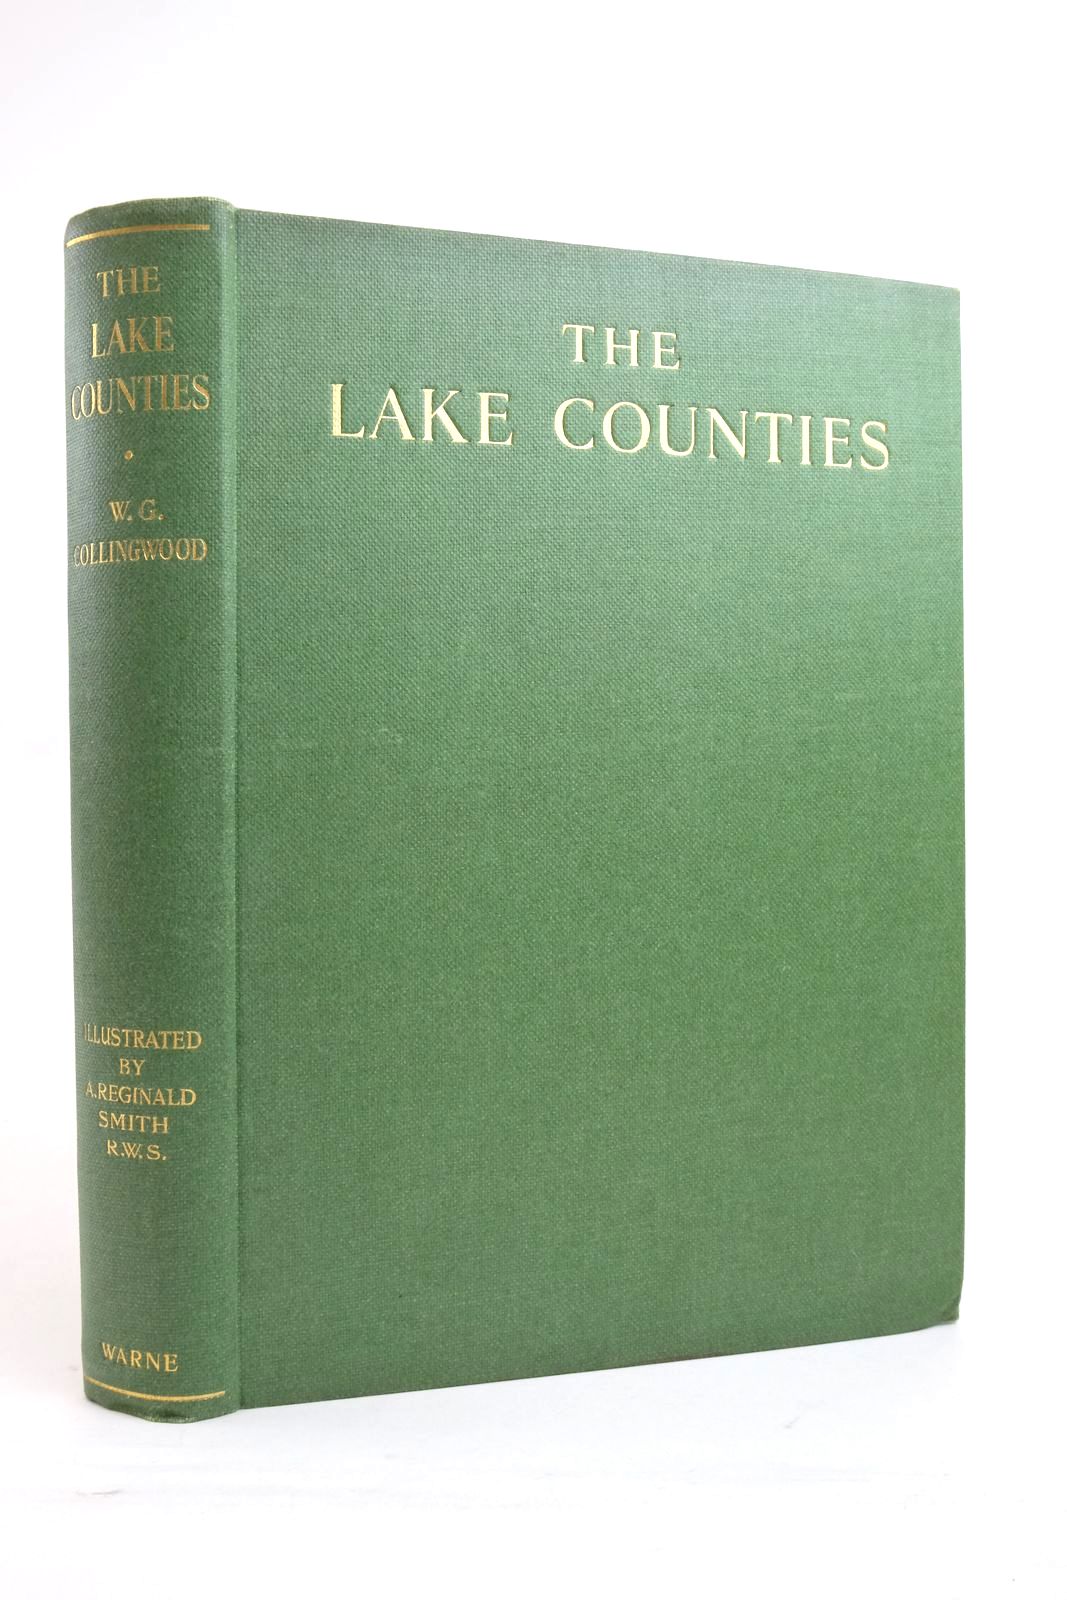 Photo of THE LAKE COUNTIES- Stock Number: 2136433